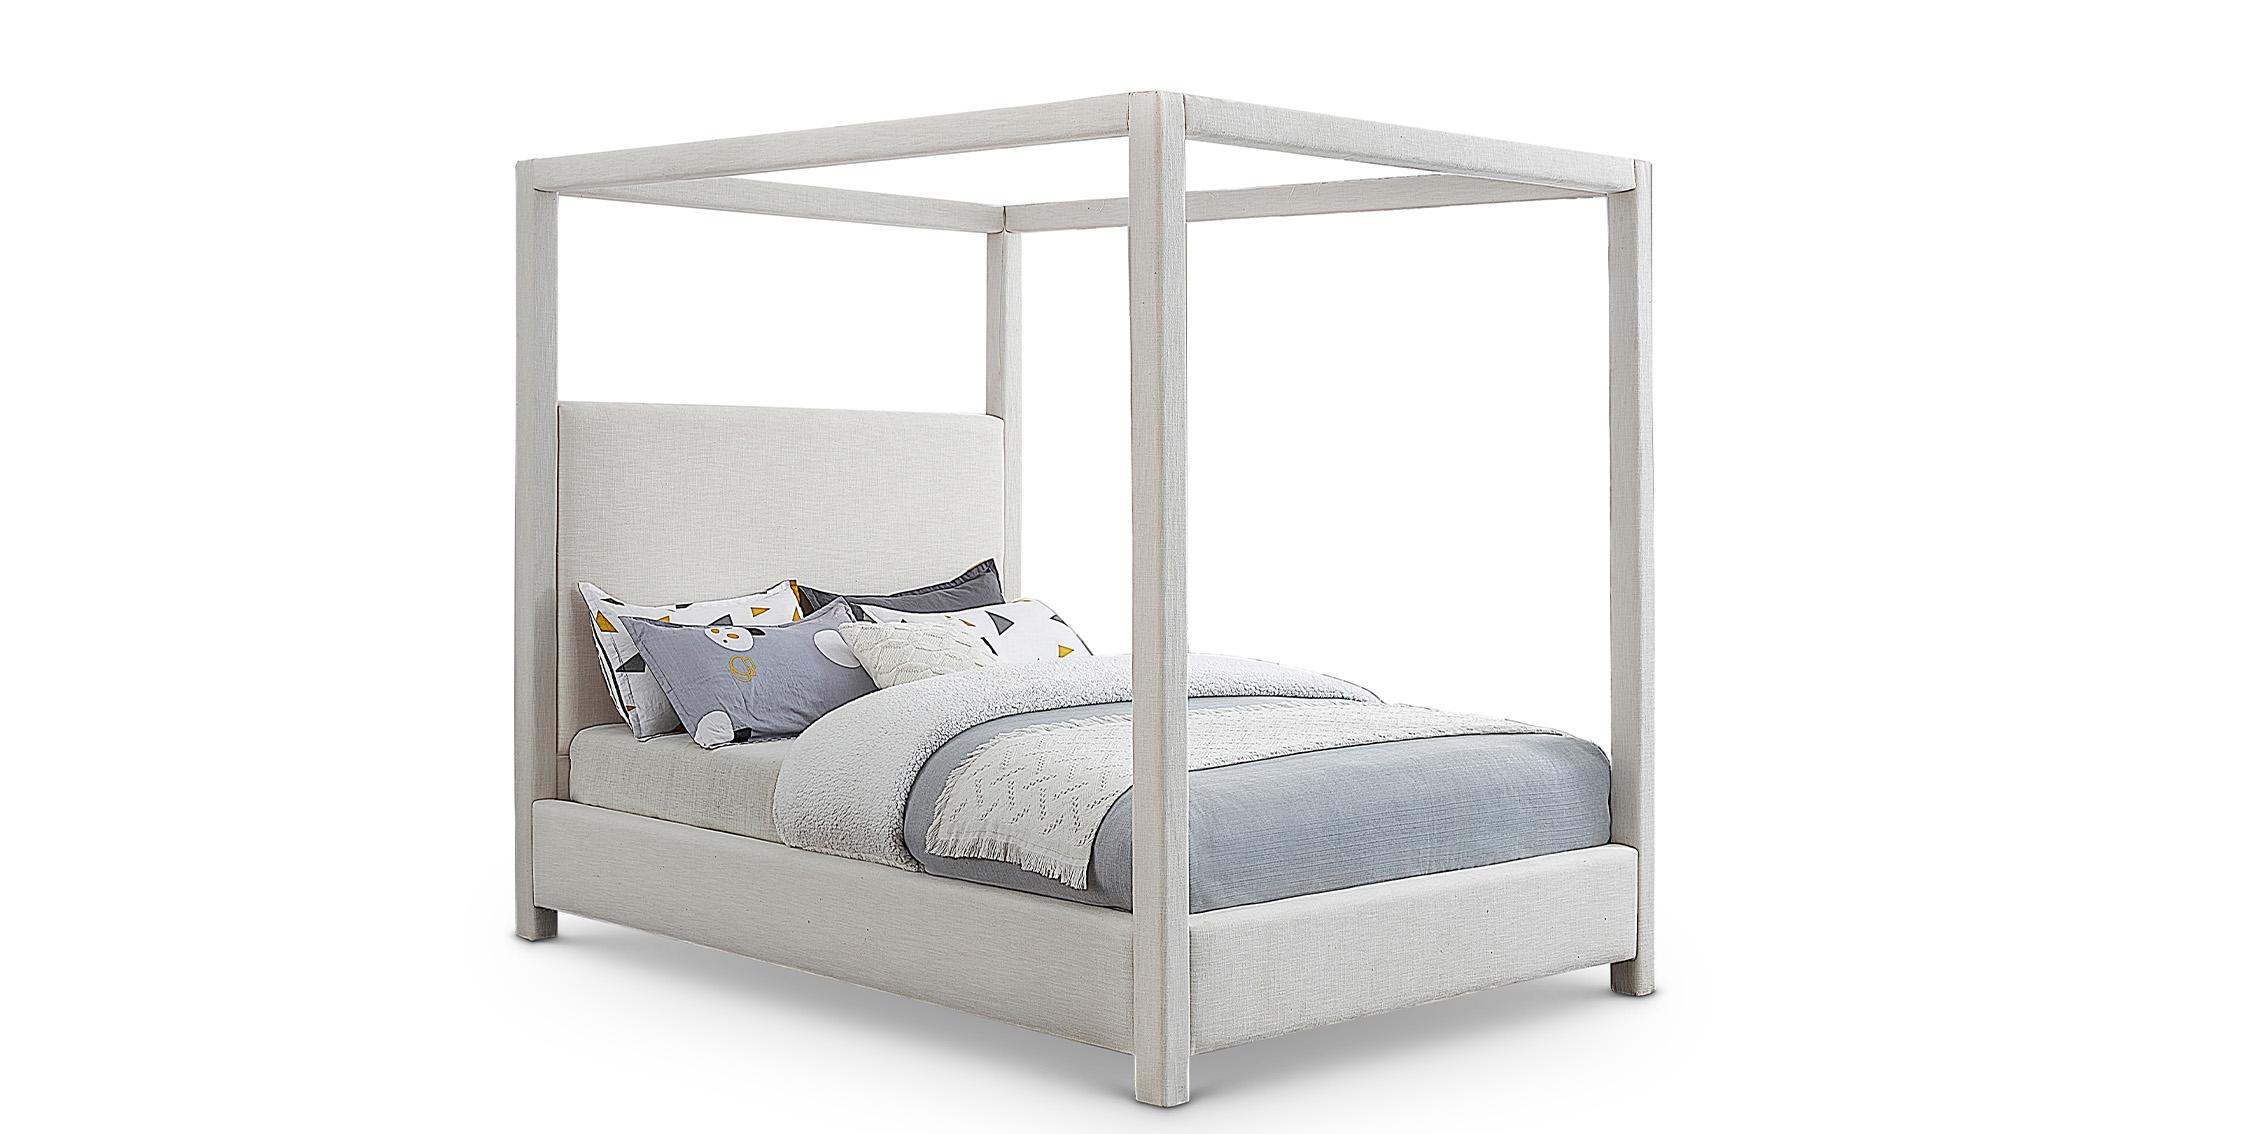 Meridian Furniture EmersonCream-Q Canopy Bed